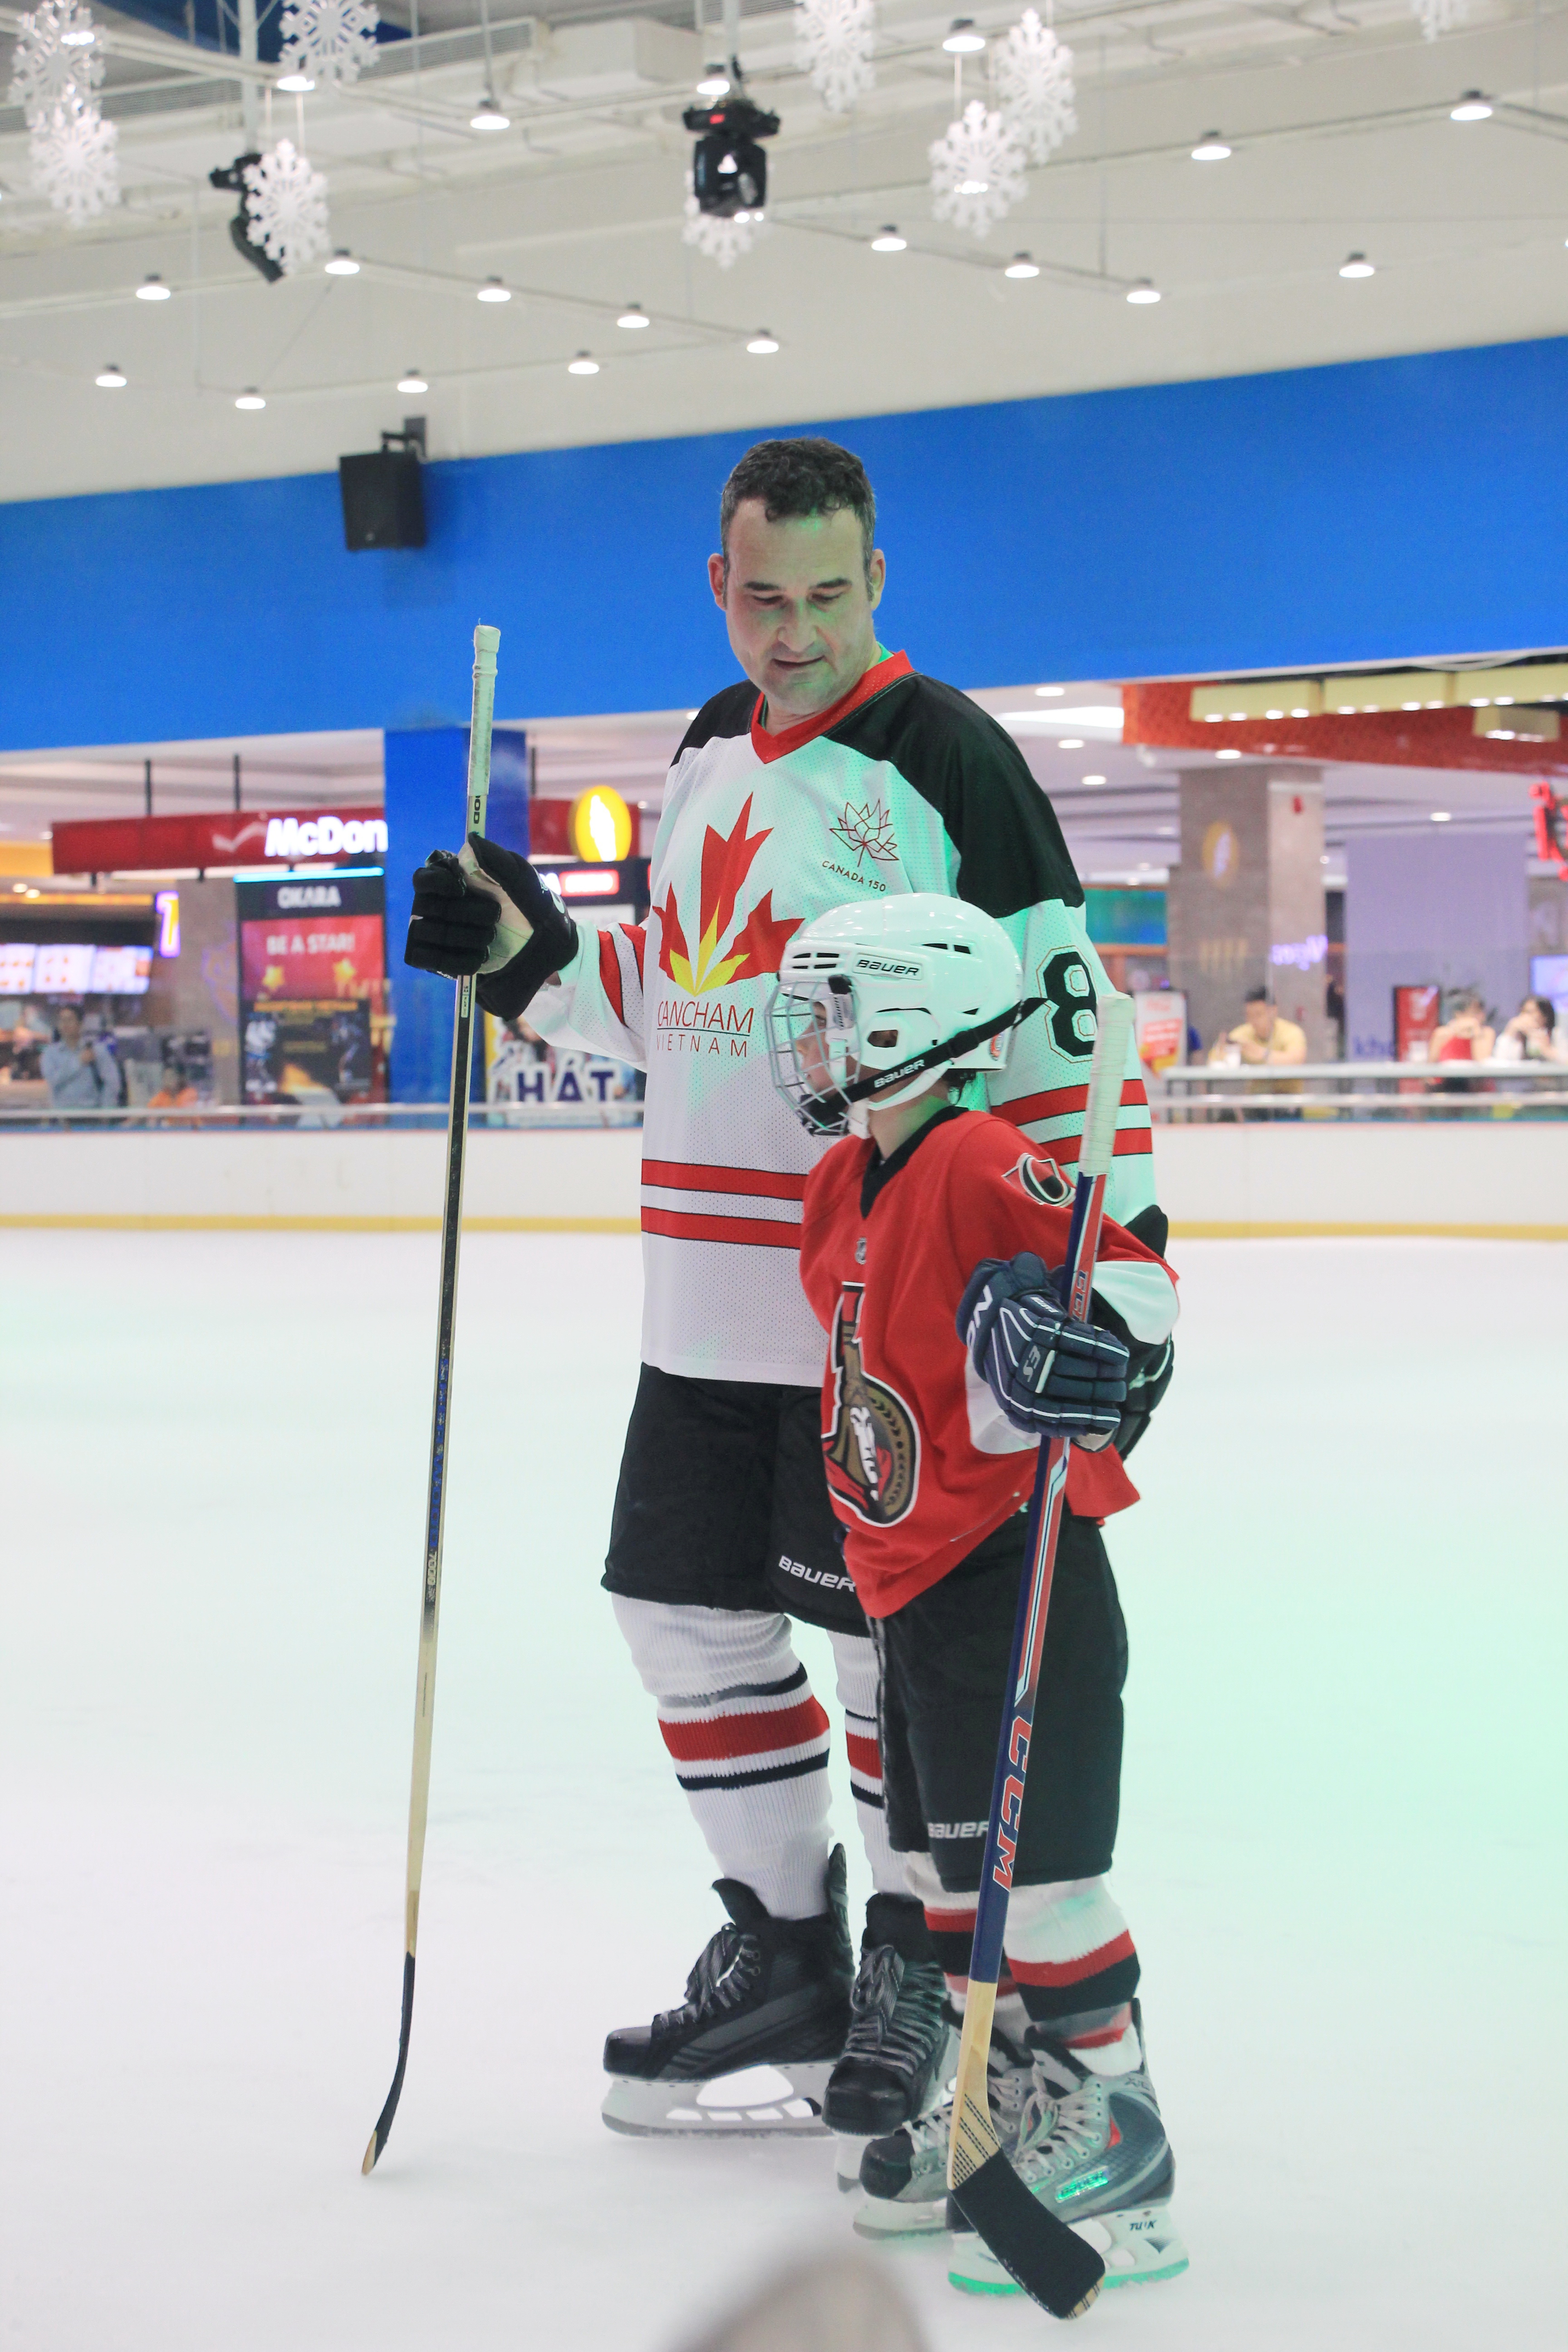 Canadian Consul General Kyle Nunas and his son in a hockey uniform at the event - Photo: Dong Nguyen/ Tuoi Tre News